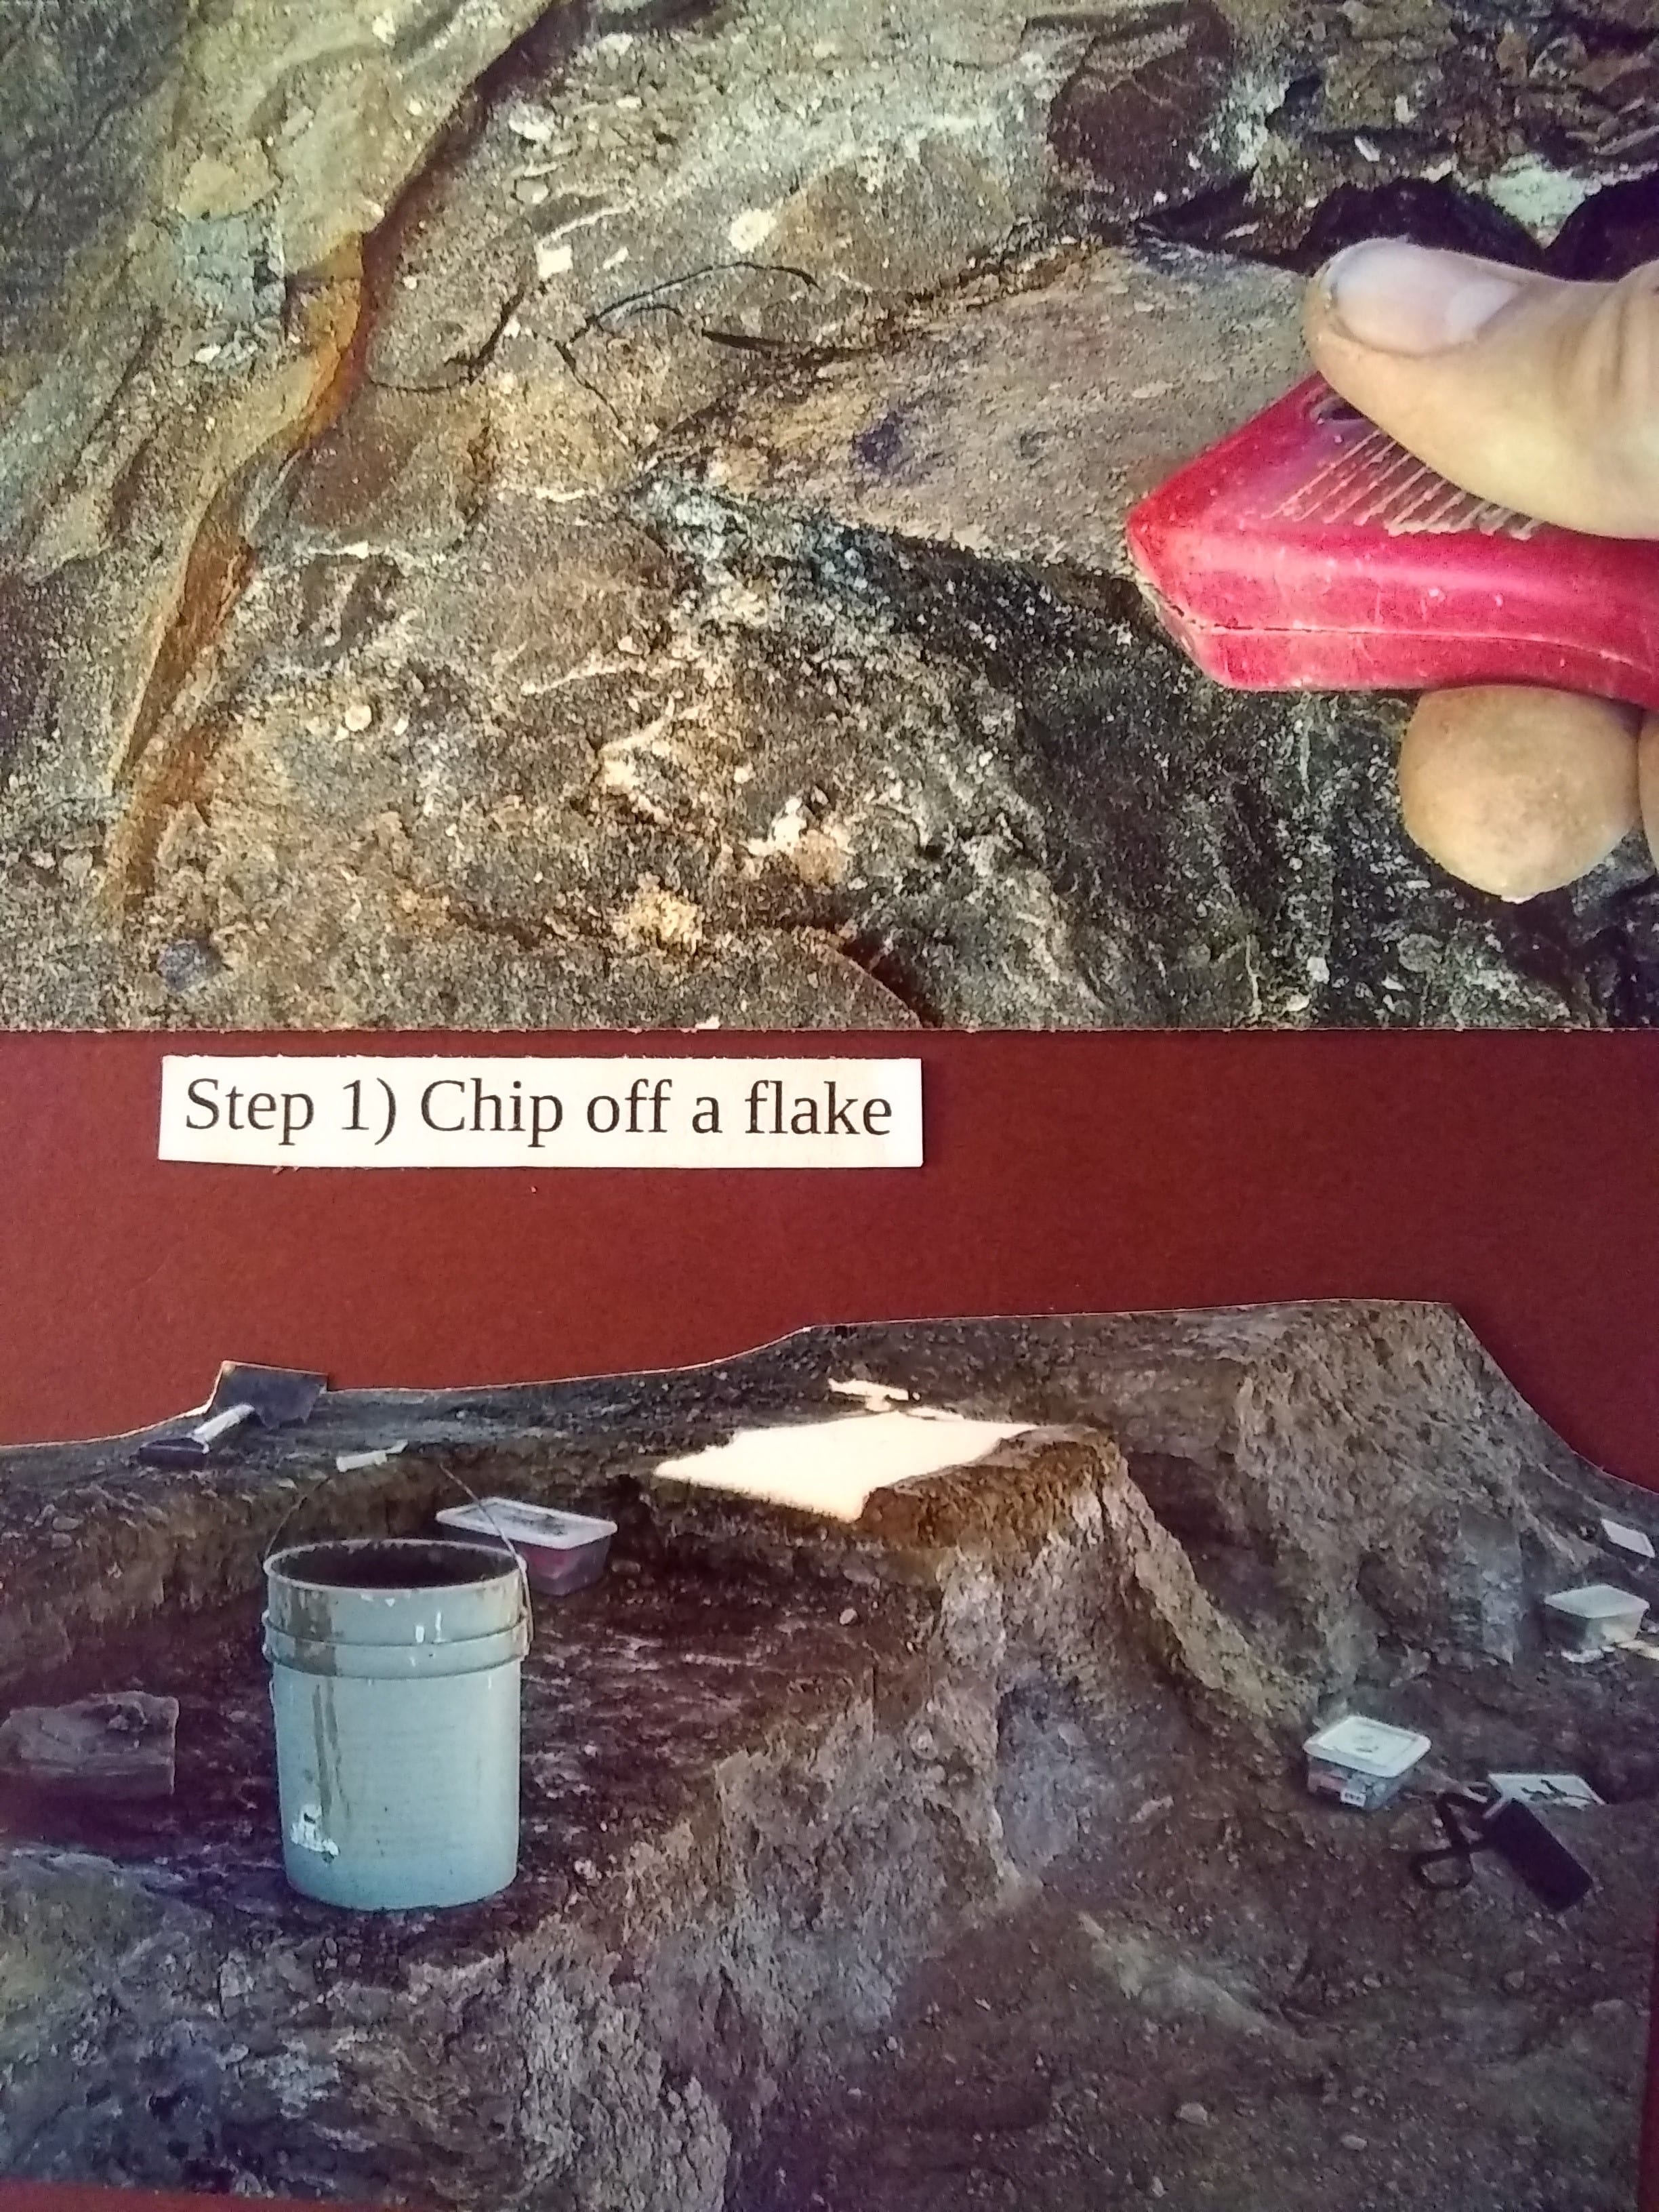 Step 1: Chip off a flake